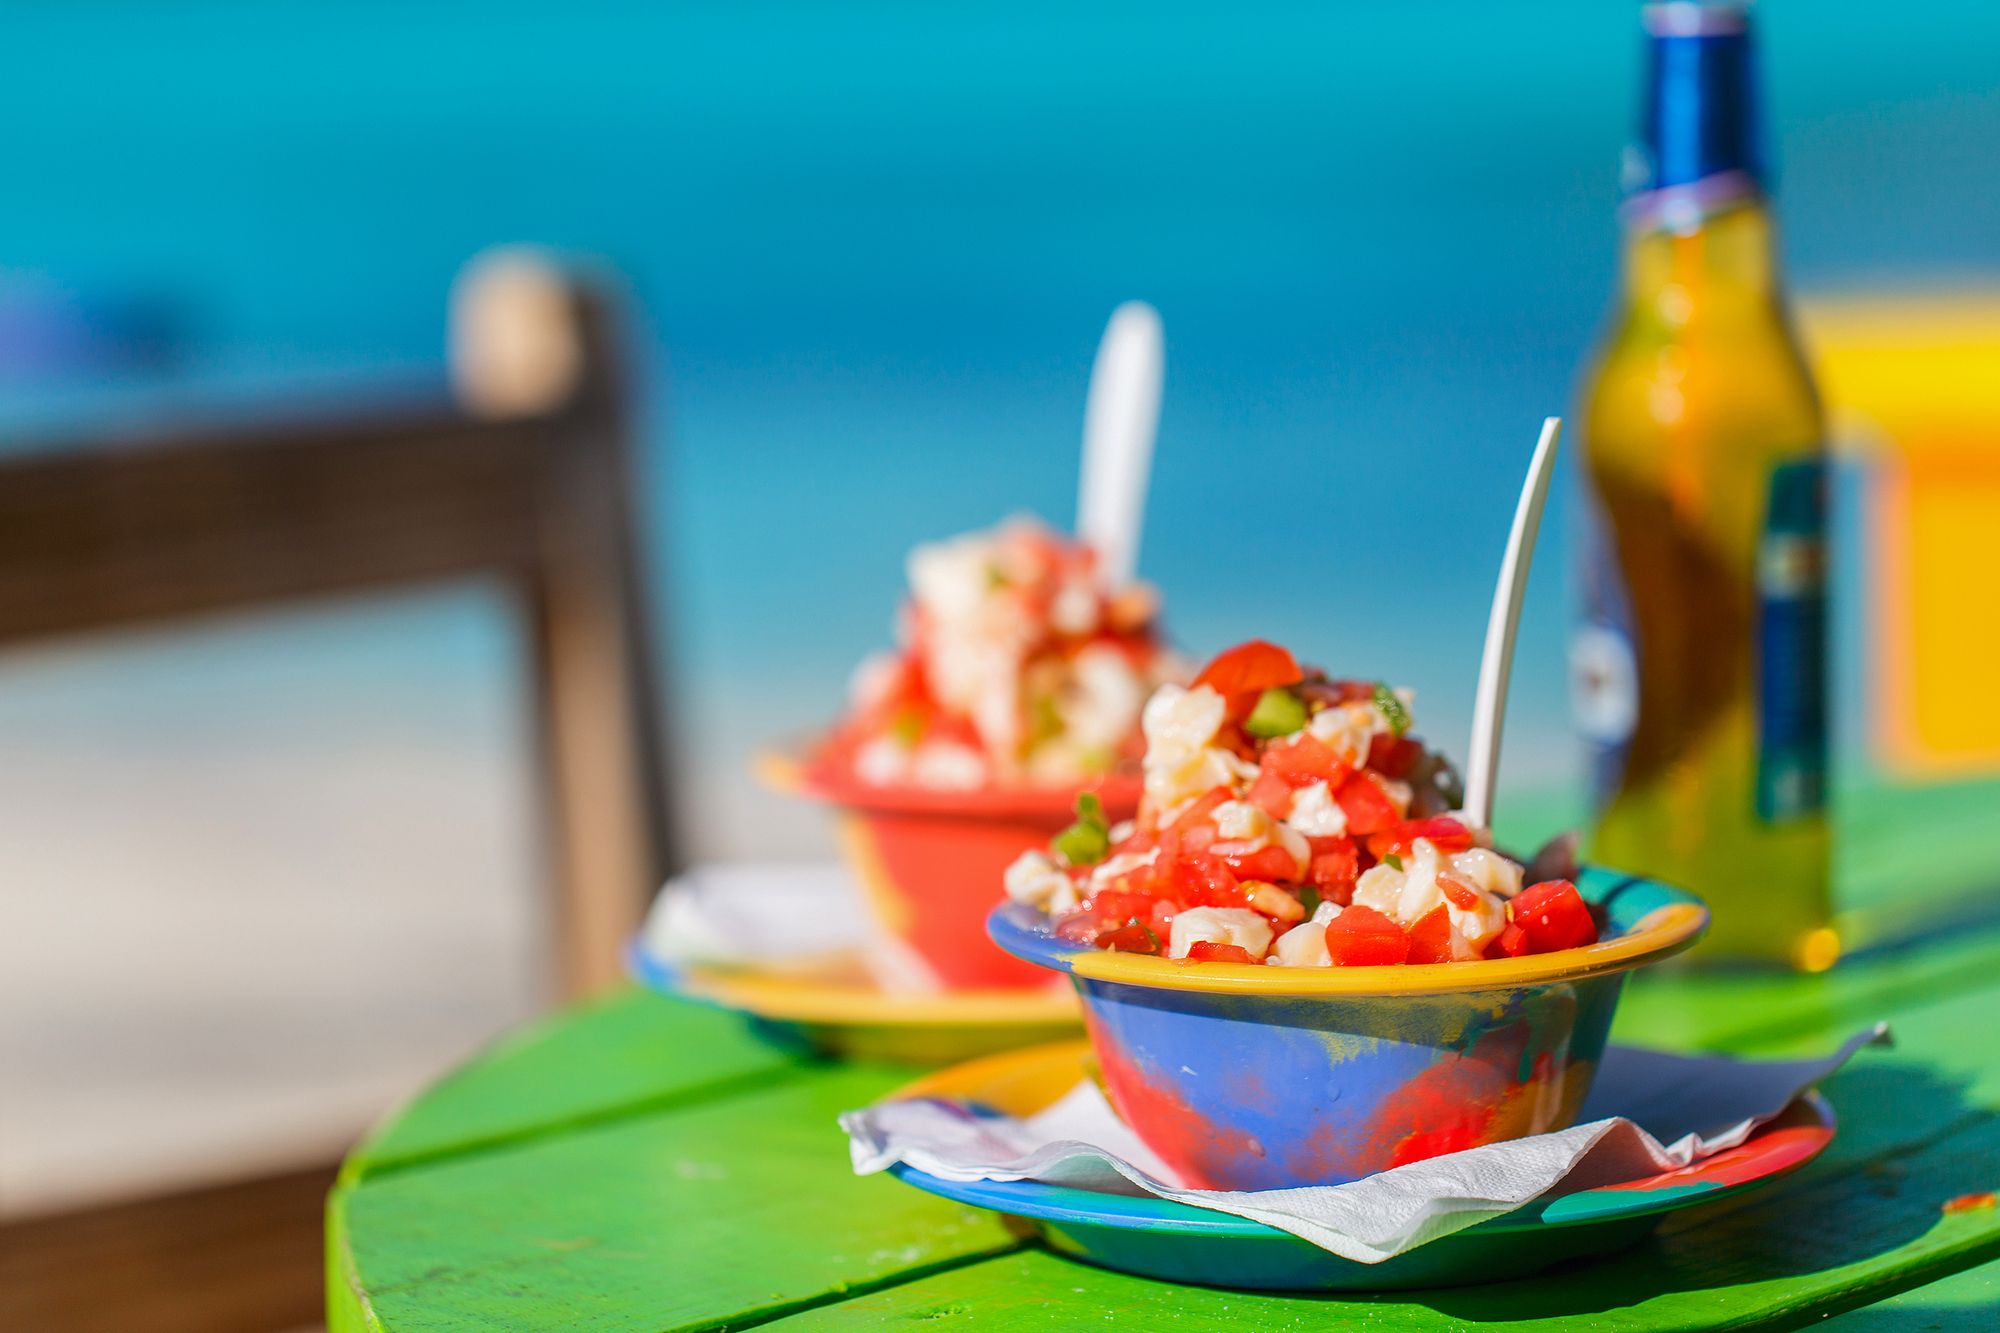 Are You A Foodie Heading To The Bahamas? These Are The Best Restaurants In Nassau!